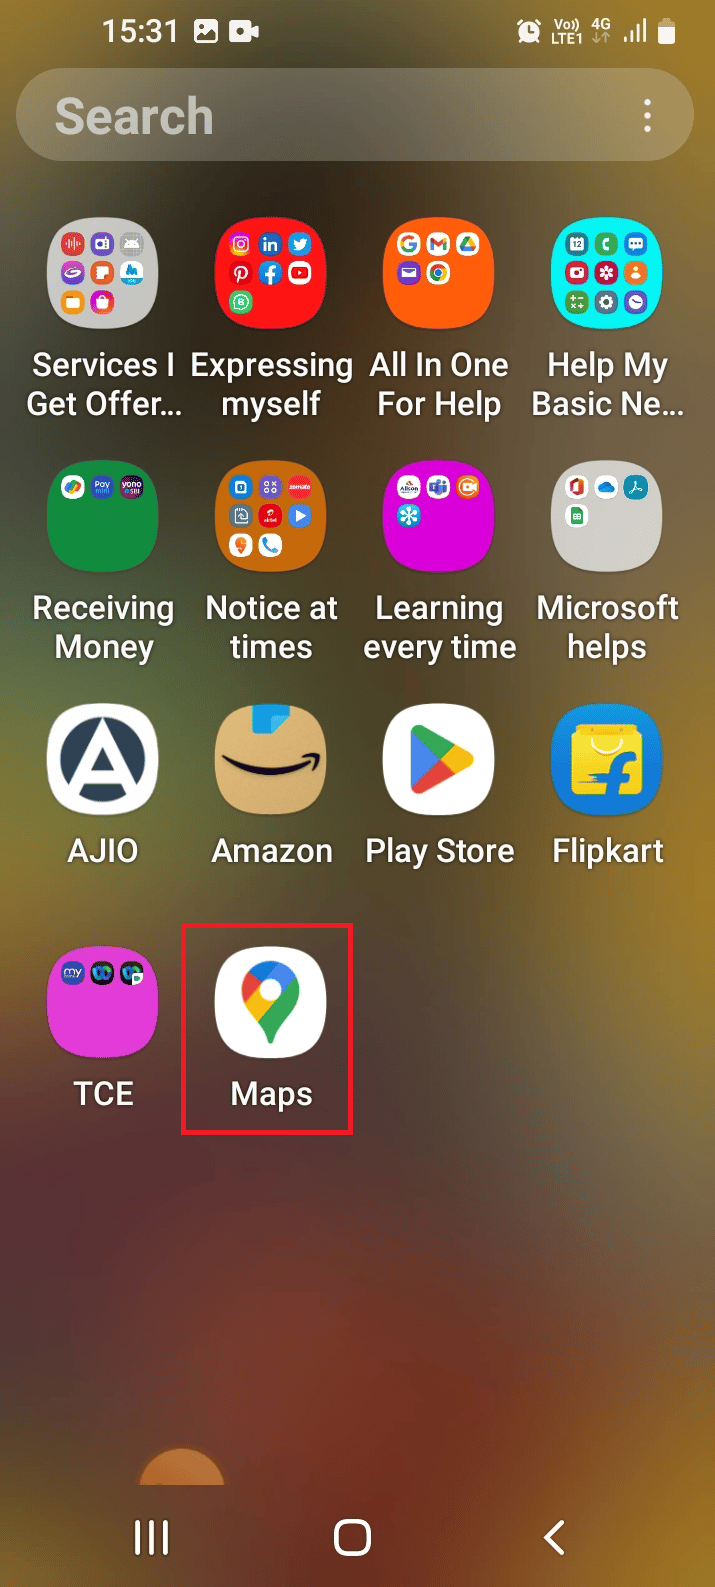 Swipe up the screen and open the Maps app